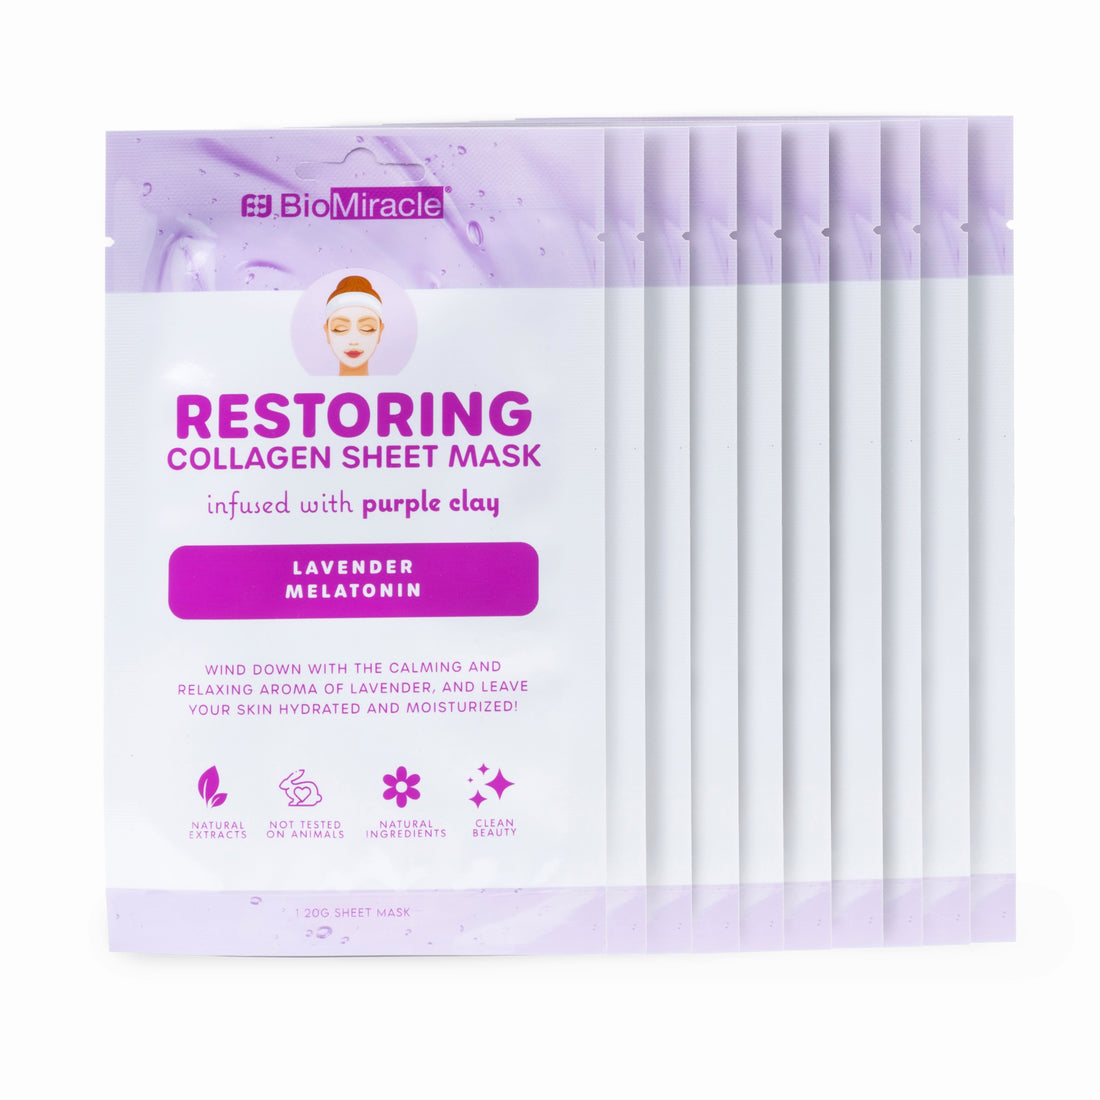 Restoring Collagen Sheet Mask Infused with Purple Clay, Lavender and Melatonin 10 Pack